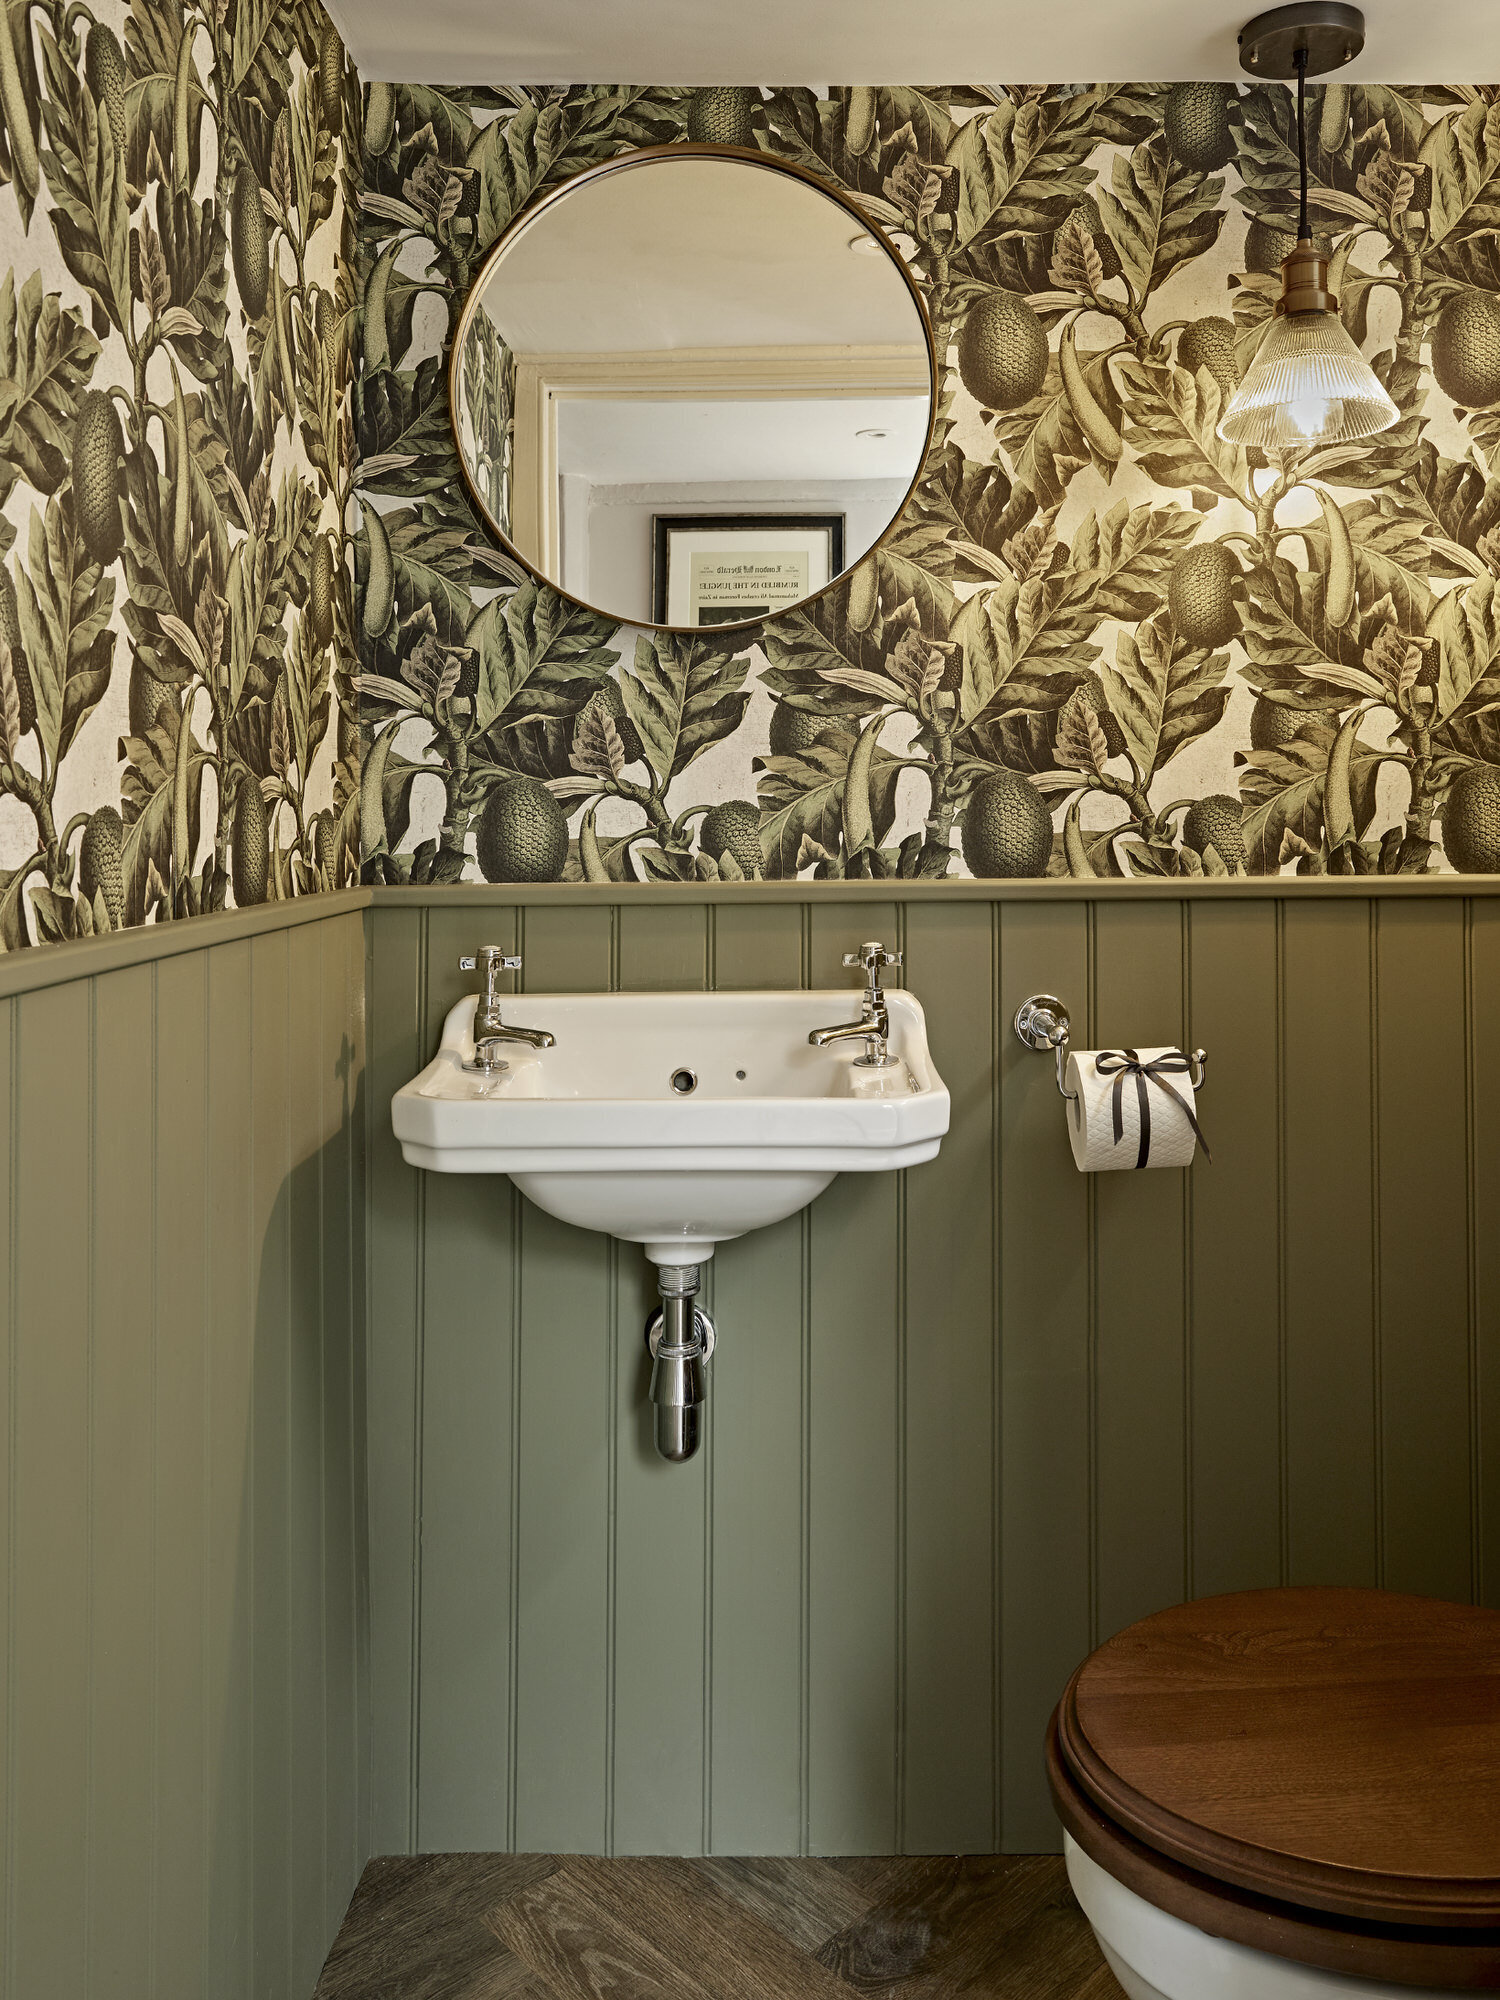 olive green wall with tropical leaf batten wall paper in bathroom with sink and round mirror